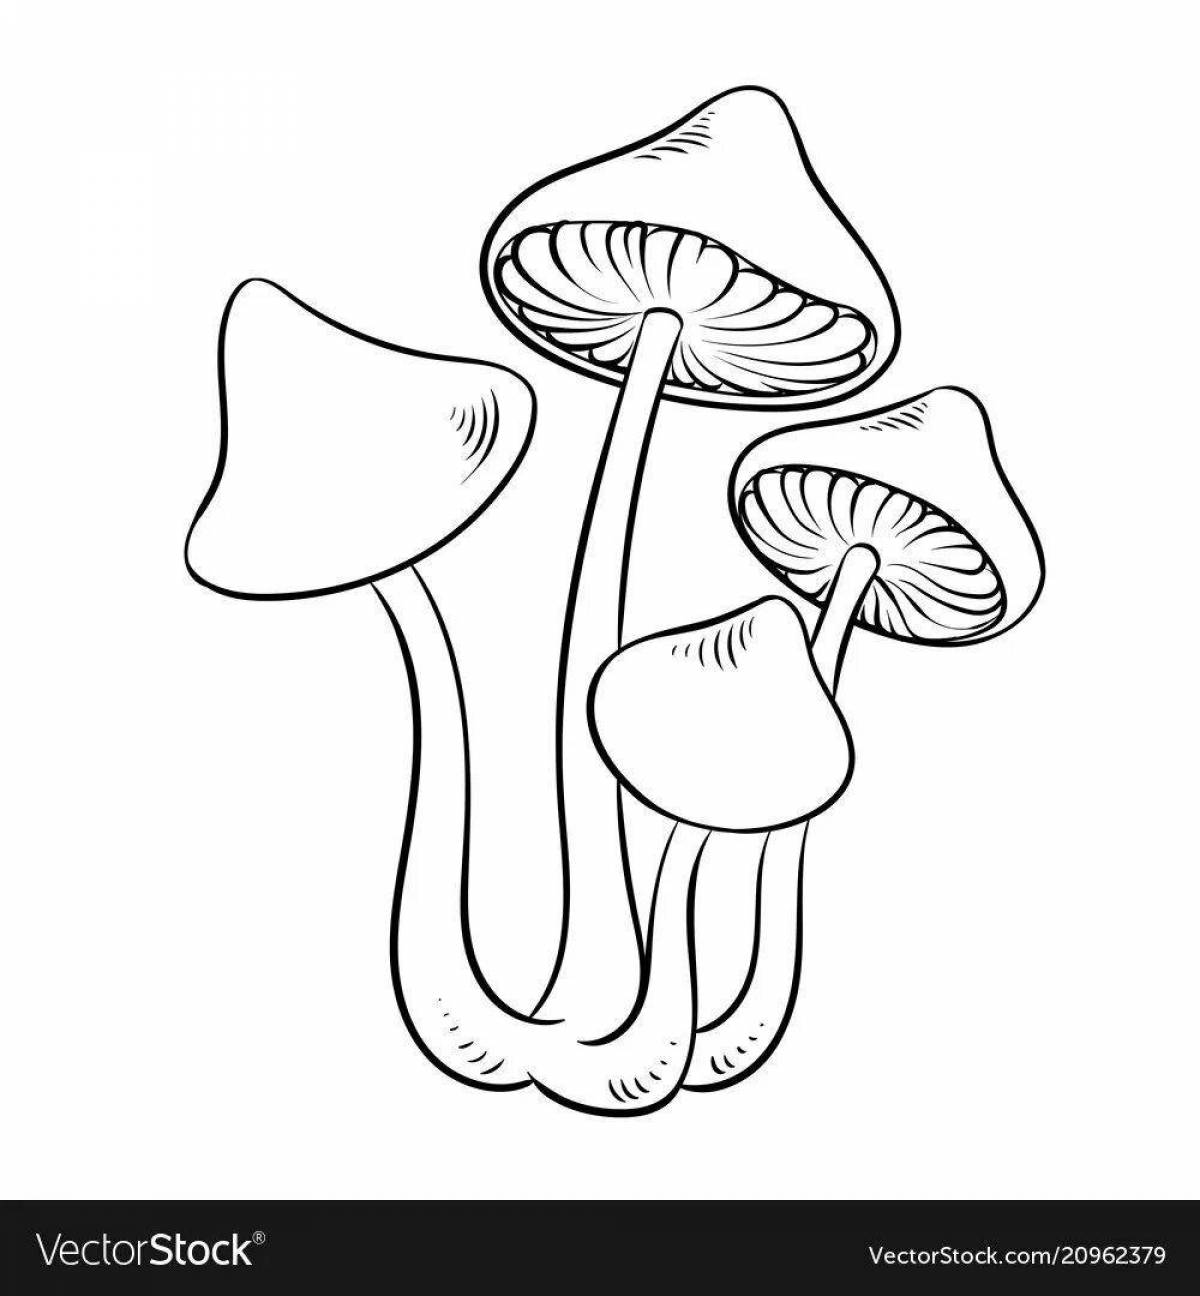 Adorable toadstool coloring book